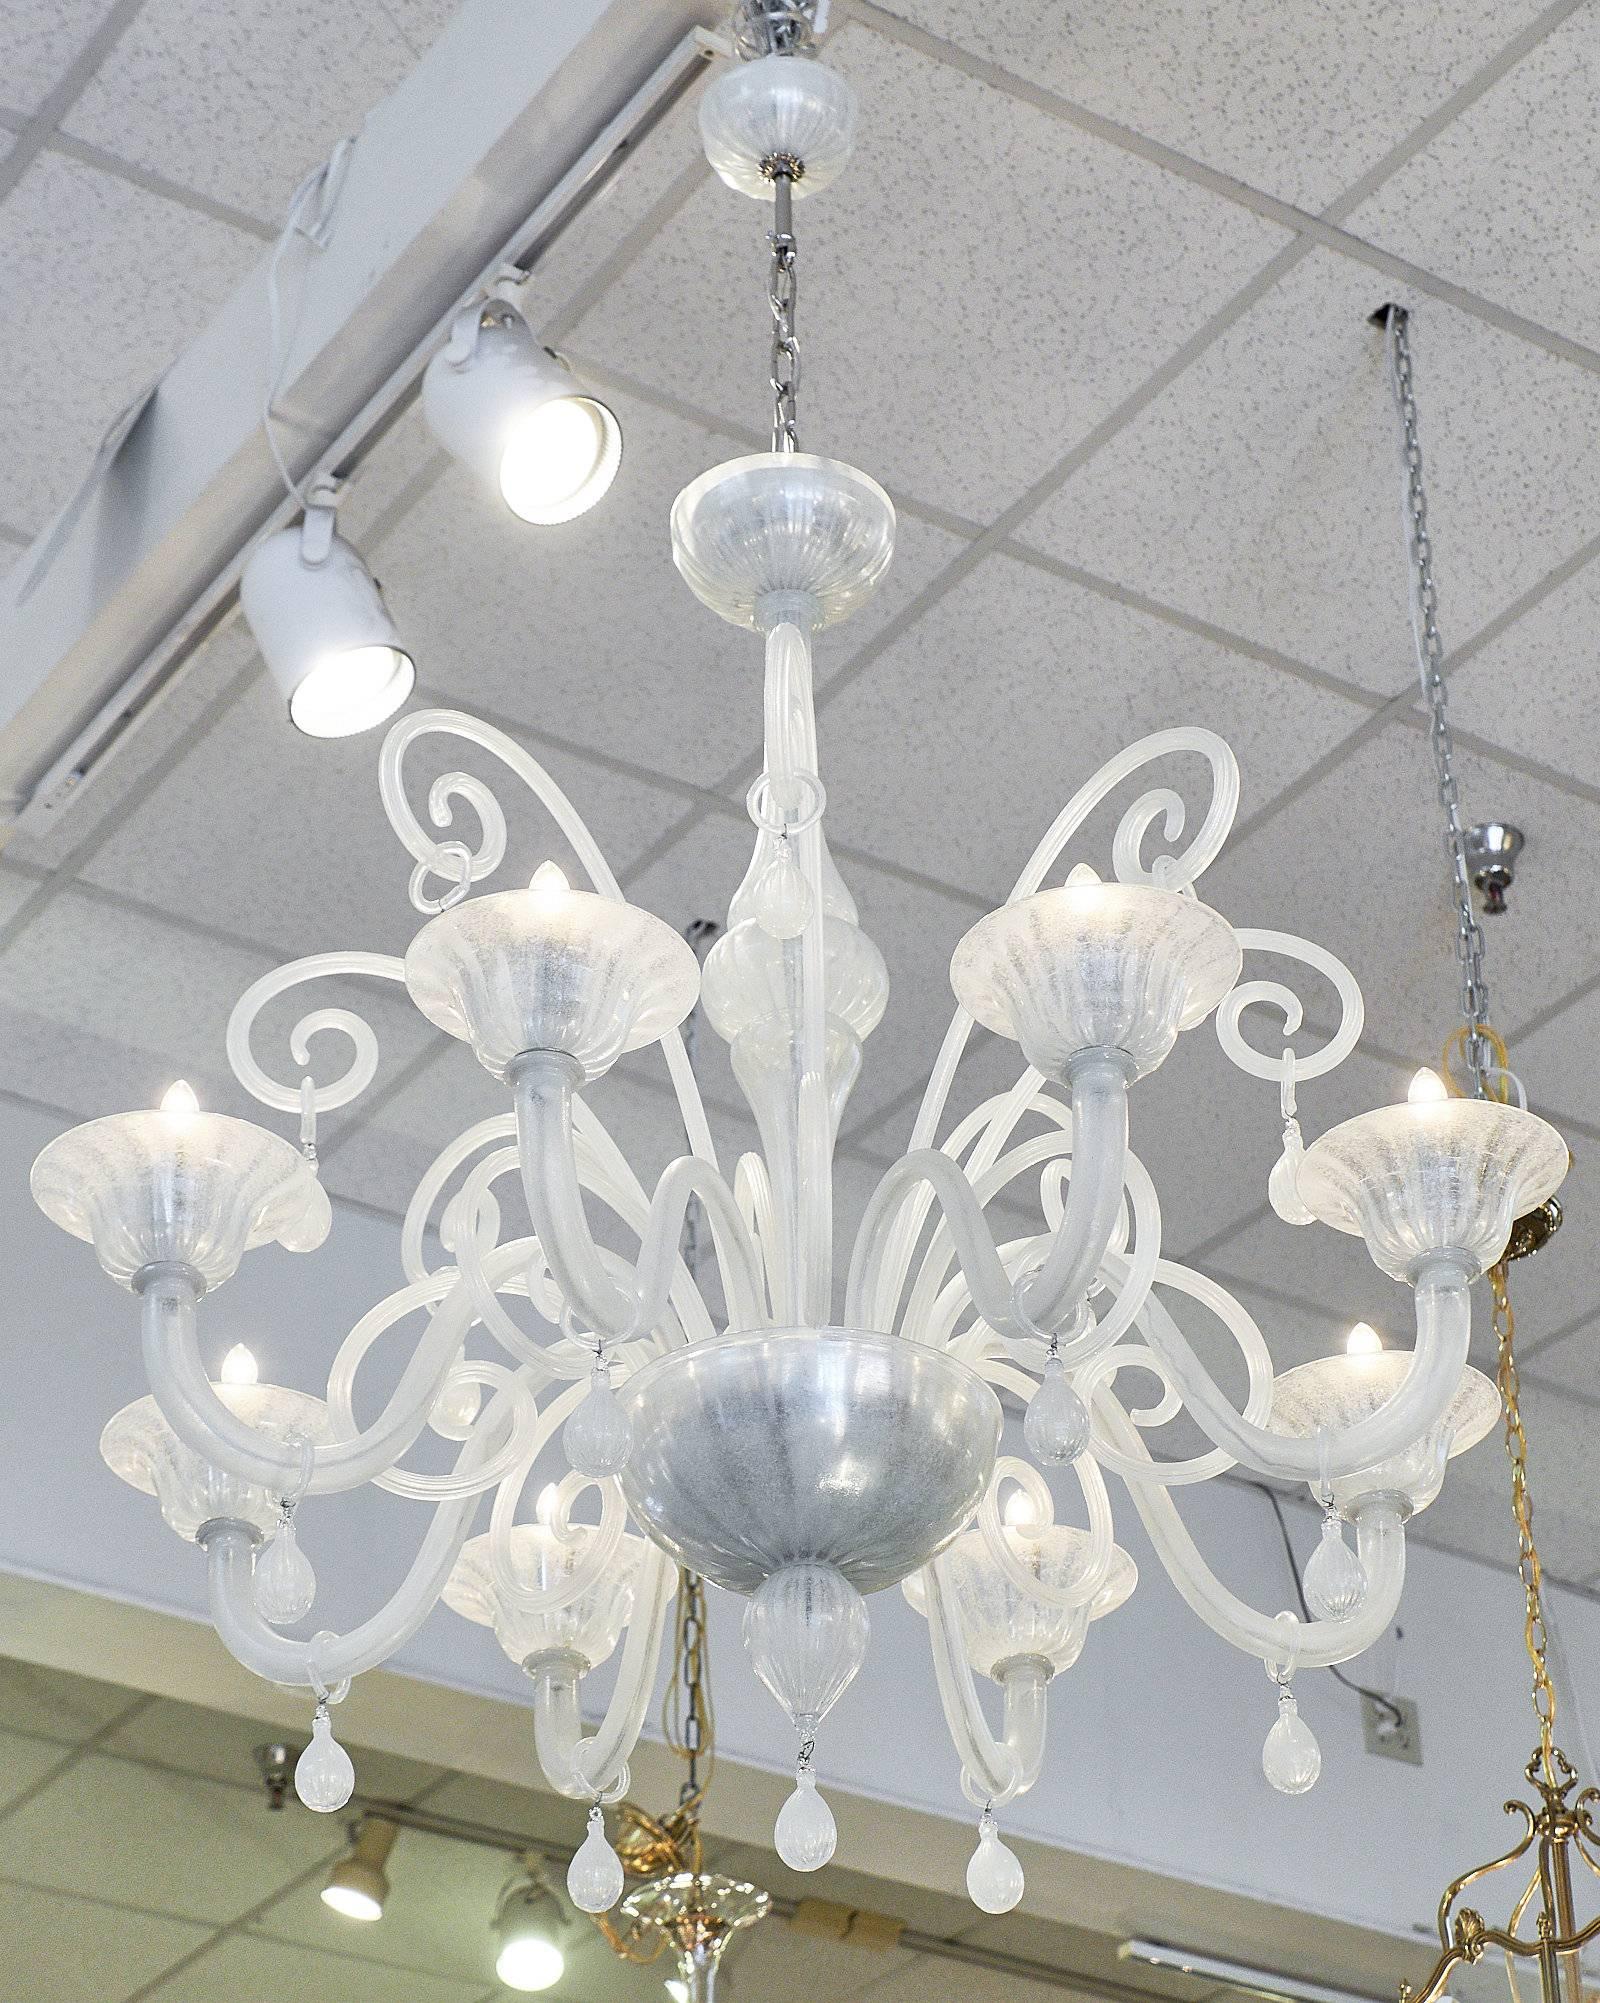 Incredible iridescent Murano glass chandelier with curled glass holding lovely drop pendants. The cupped boboches on each of the eight arms add a traditional quality to the whimsical piece. The handblown glass is stunning as the light reflects off